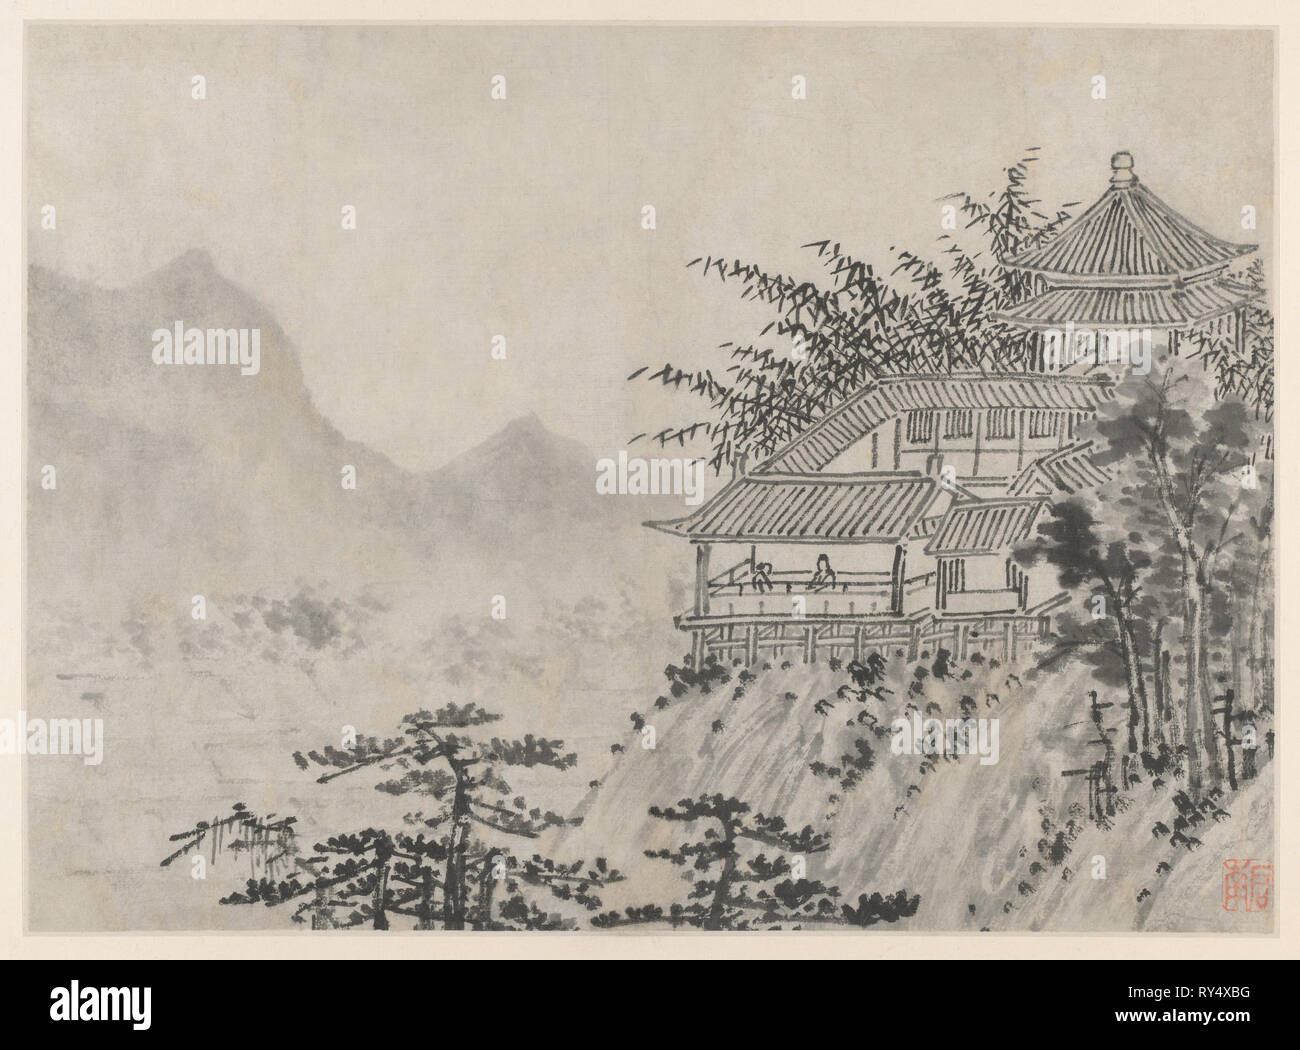 Twelve Views of Tiger Hill, Suzhou: The Thousand Acres of Clouds, after 1490. Shen Zhou (Chinese, 1427-1509). Album leaf, ink on paper or ink and slight color on paper; image: 30.8 x 42.2 cm (12 1/8 x 16 5/8 in.); overall: 36.5 x 49.9 cm (14 3/8 x 19 5/8 in Stock Photo